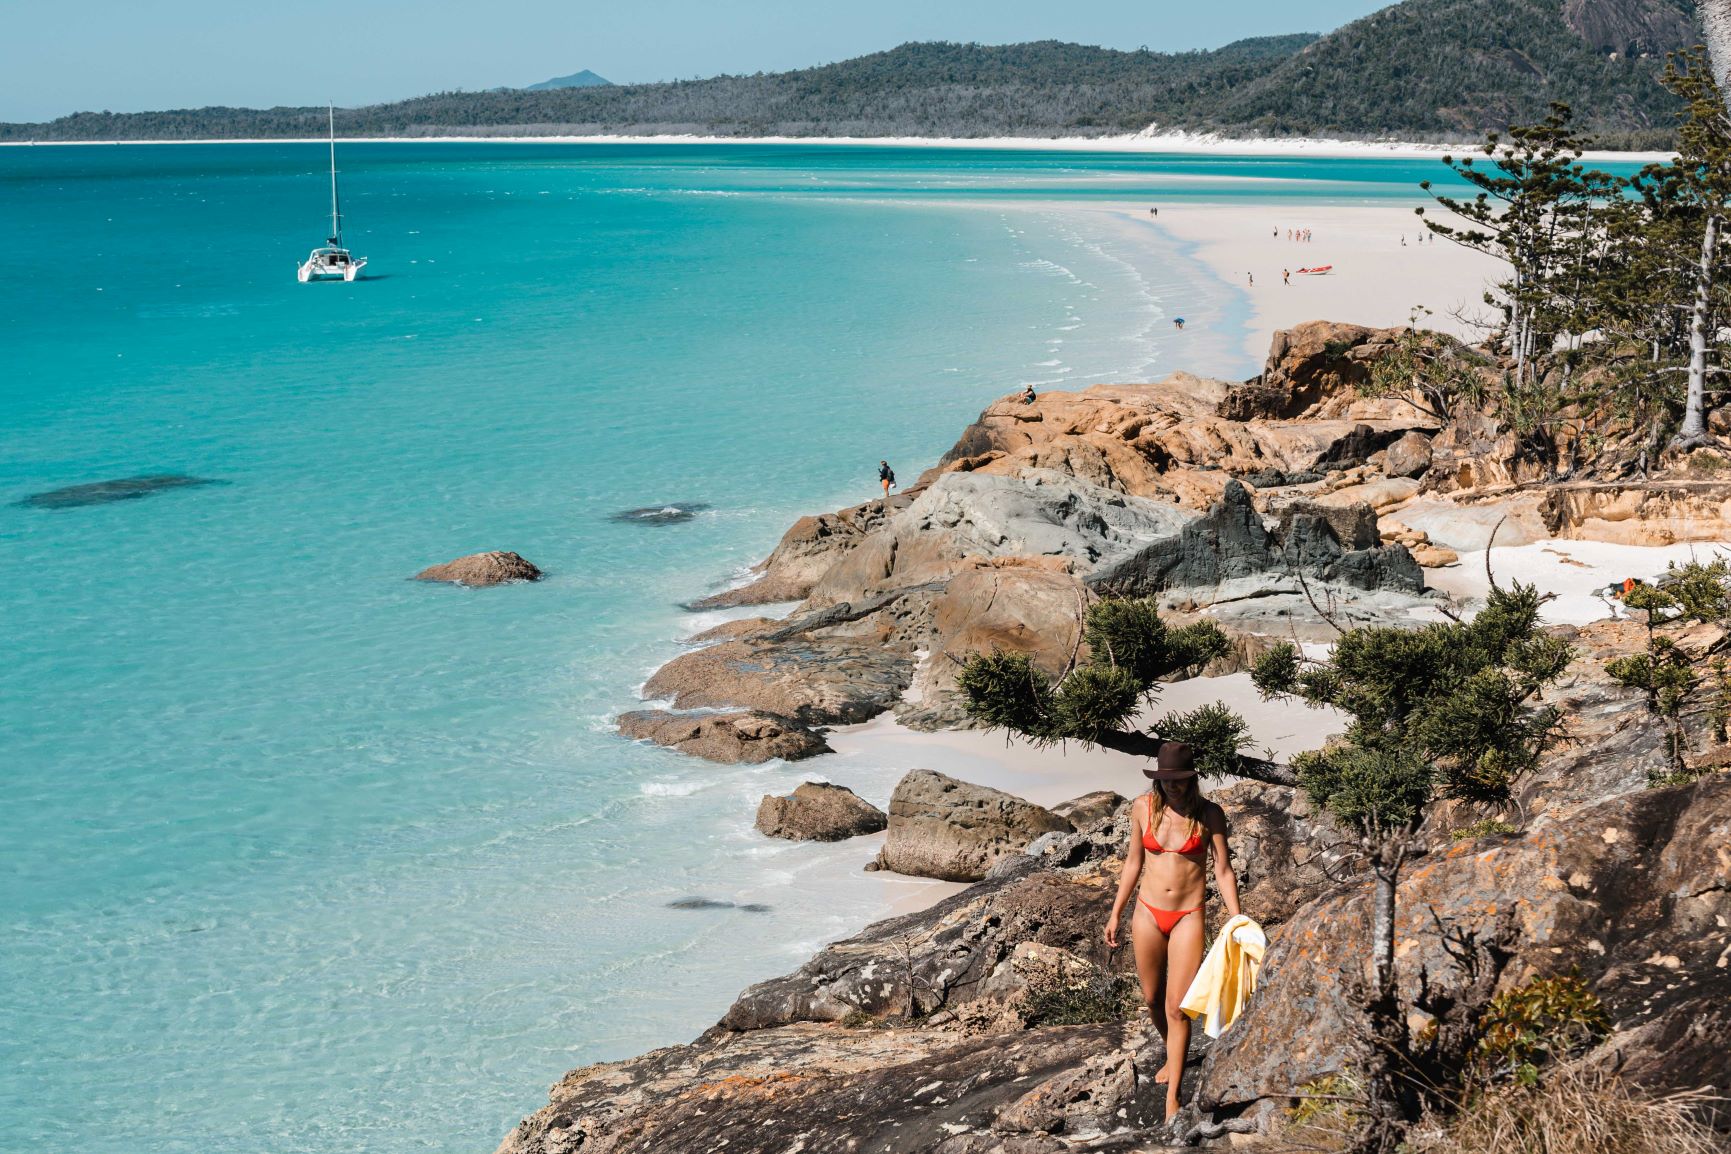 3 Day and 2 Night Whitsunday Maxi Sailing Adventure on Hammer